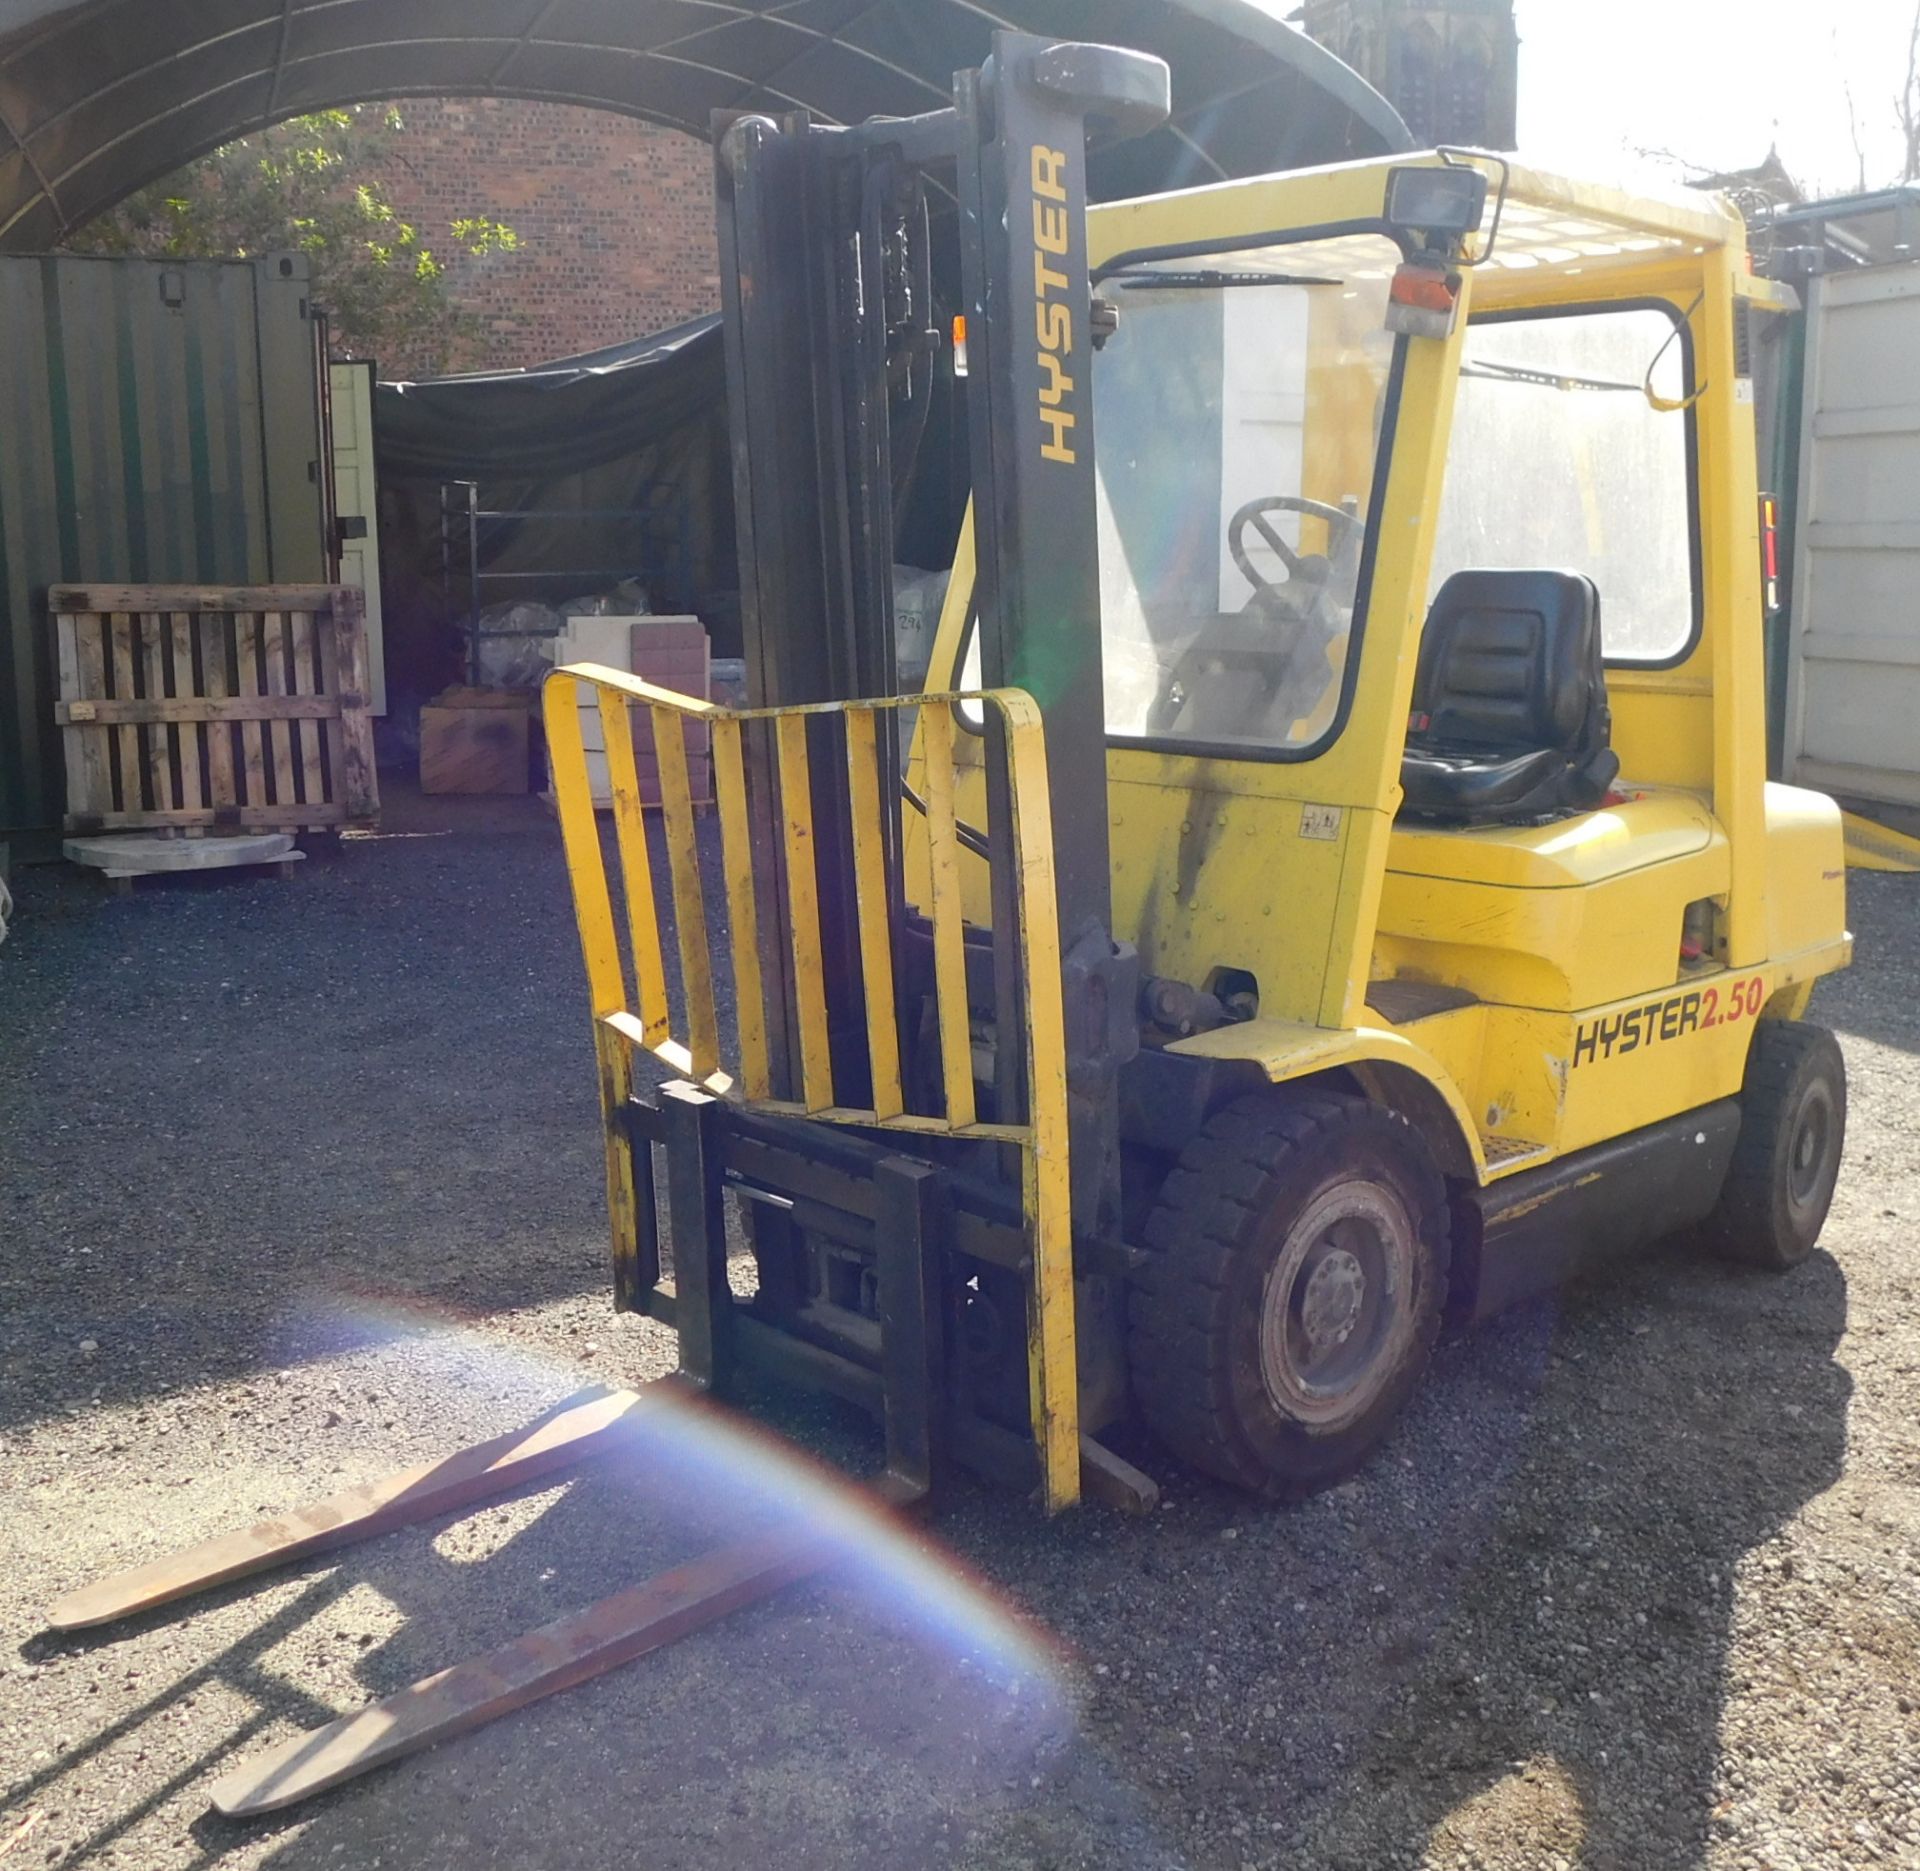 Hyster H2.50XM Diesel Forklift, H177B32597Z (2002), Capacity 2.5t (Collection Thursday 23rd May –